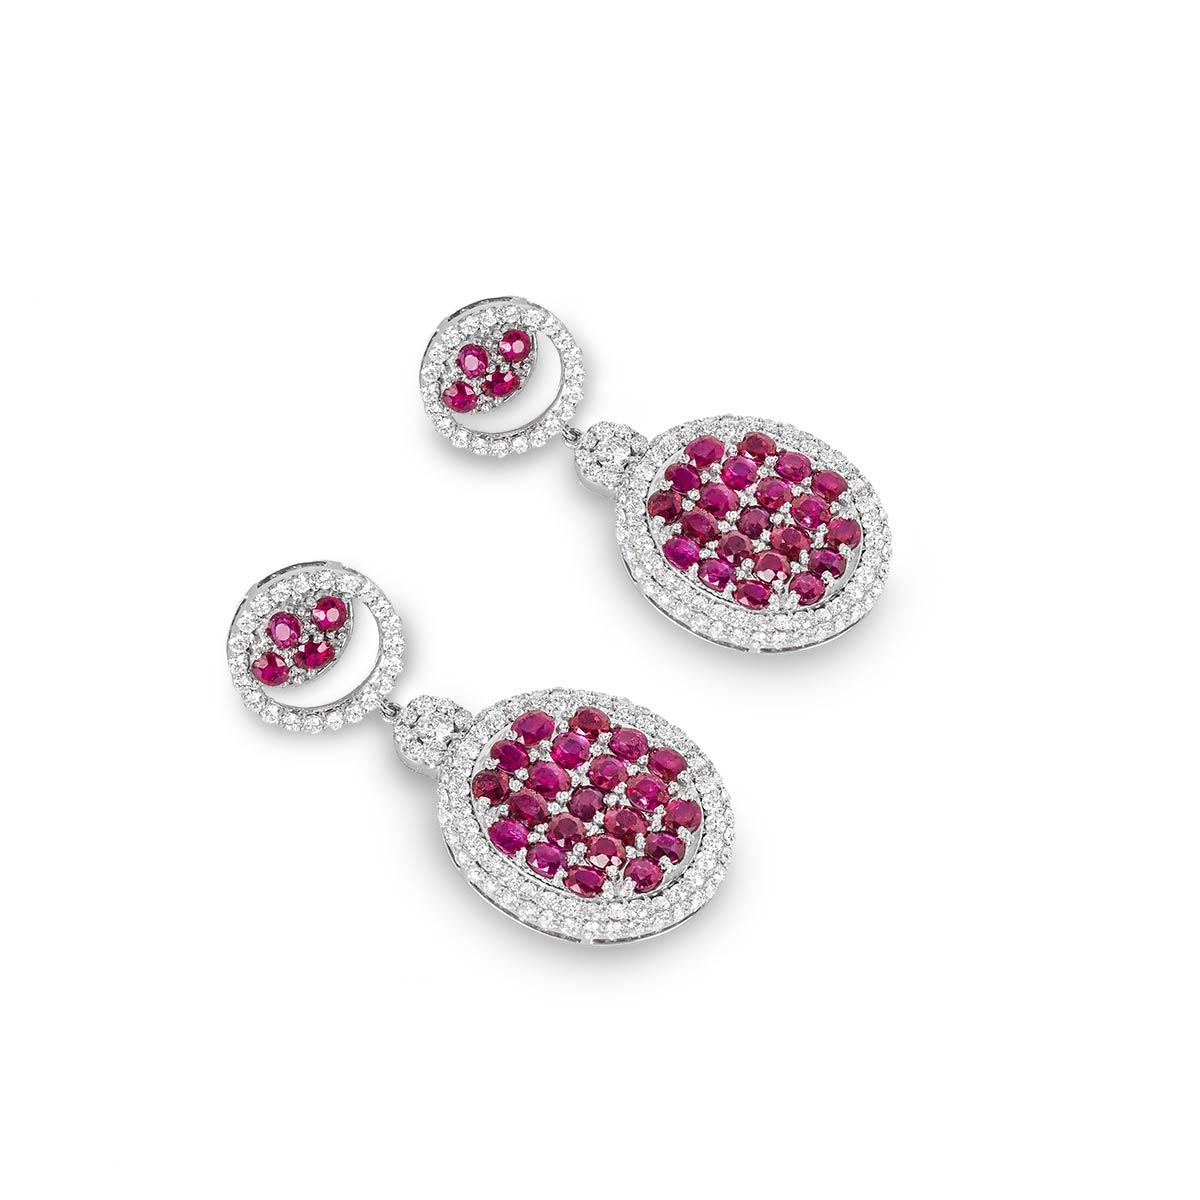 An 18k white gold pair of diamond and ruby earrings. The earrings feature two circular motifs suspended from one another set with pave round brilliant cut diamonds through the outer edge with round rubies set in the centre. The diamonds have a